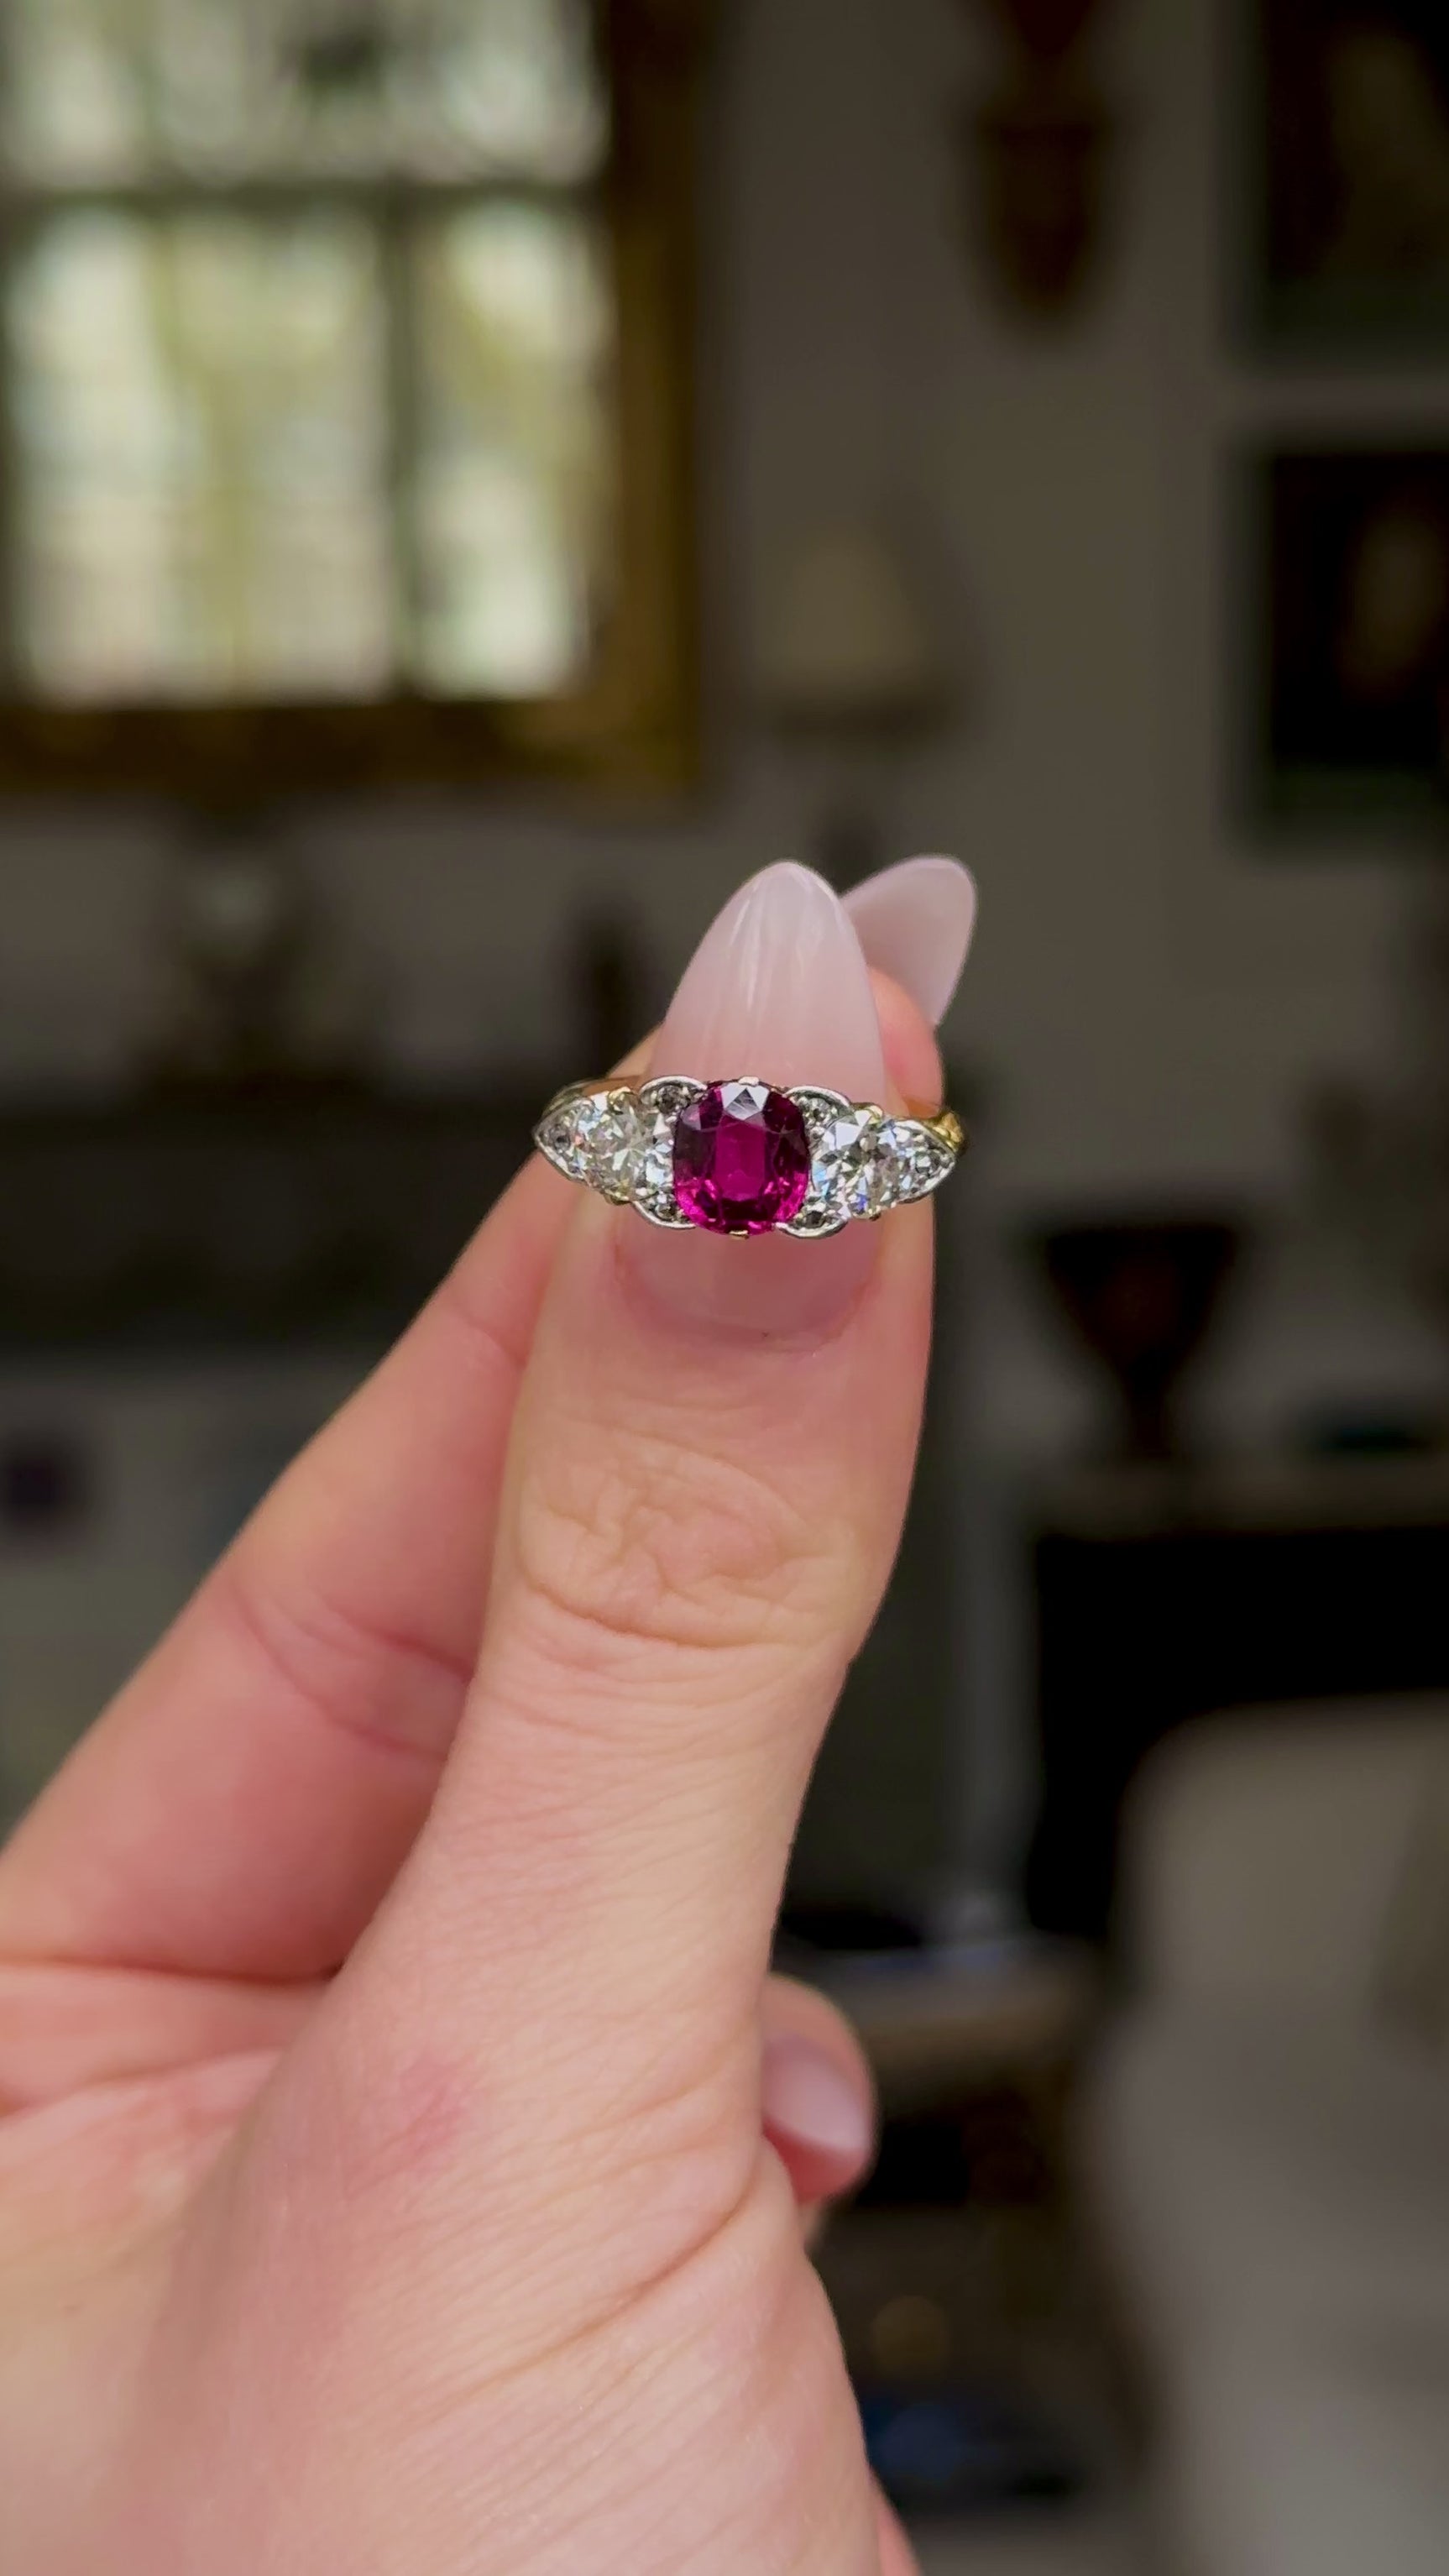 Antique, Edwardian Three Stone Ruby and Diamond Engagement Ring, held in fingers and rotated to give perspective.